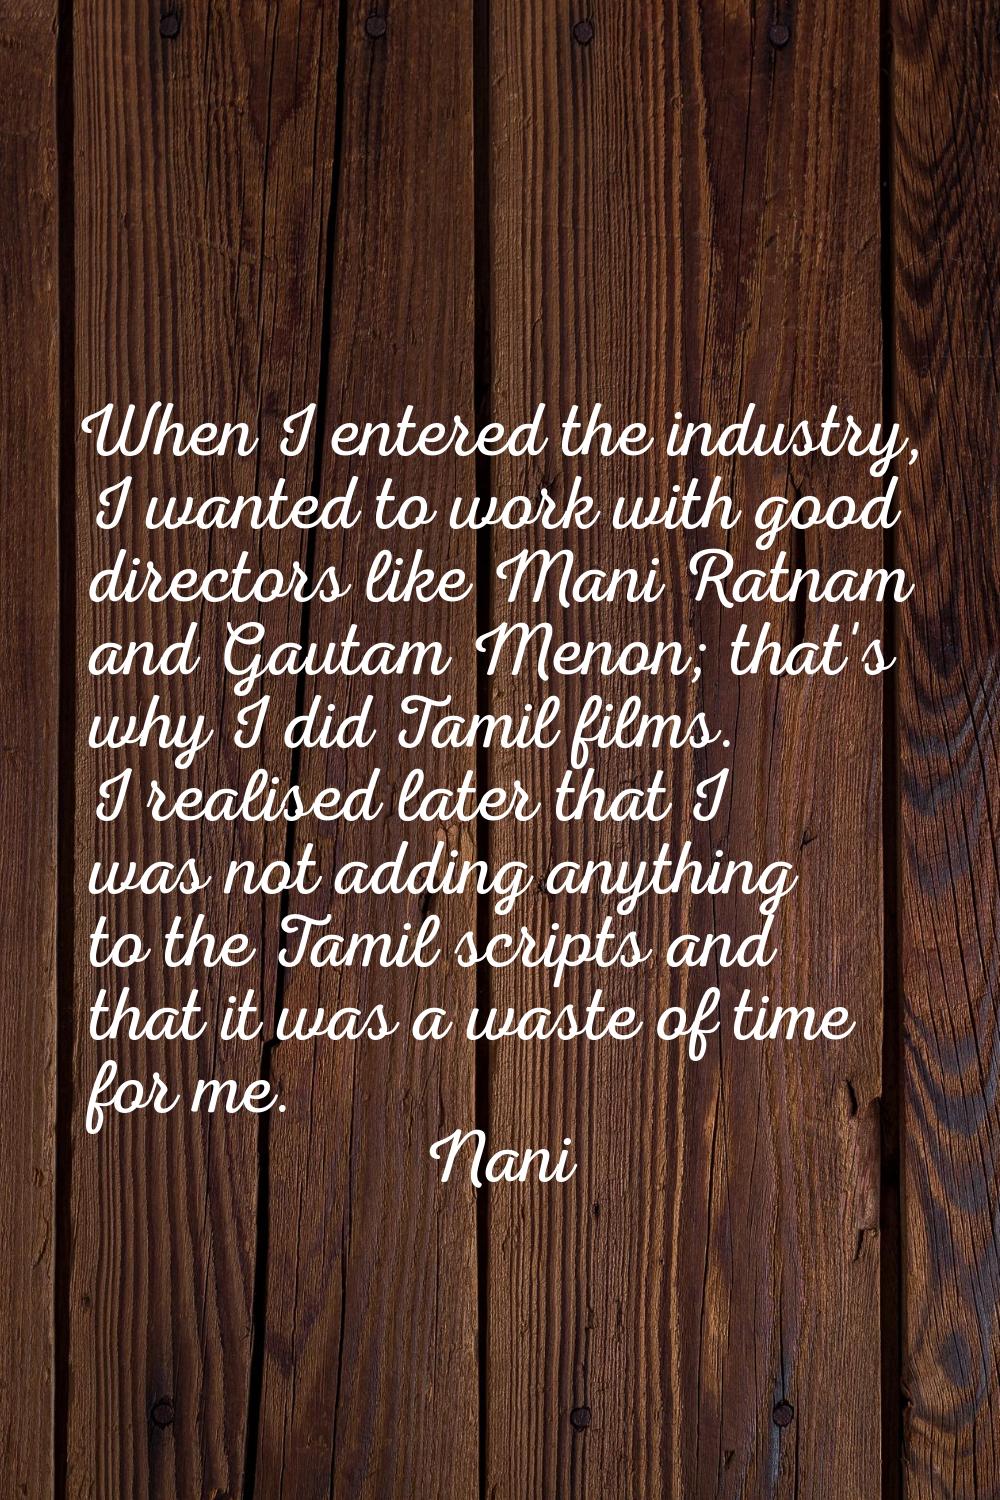 When I entered the industry, I wanted to work with good directors like Mani Ratnam and Gautam Menon